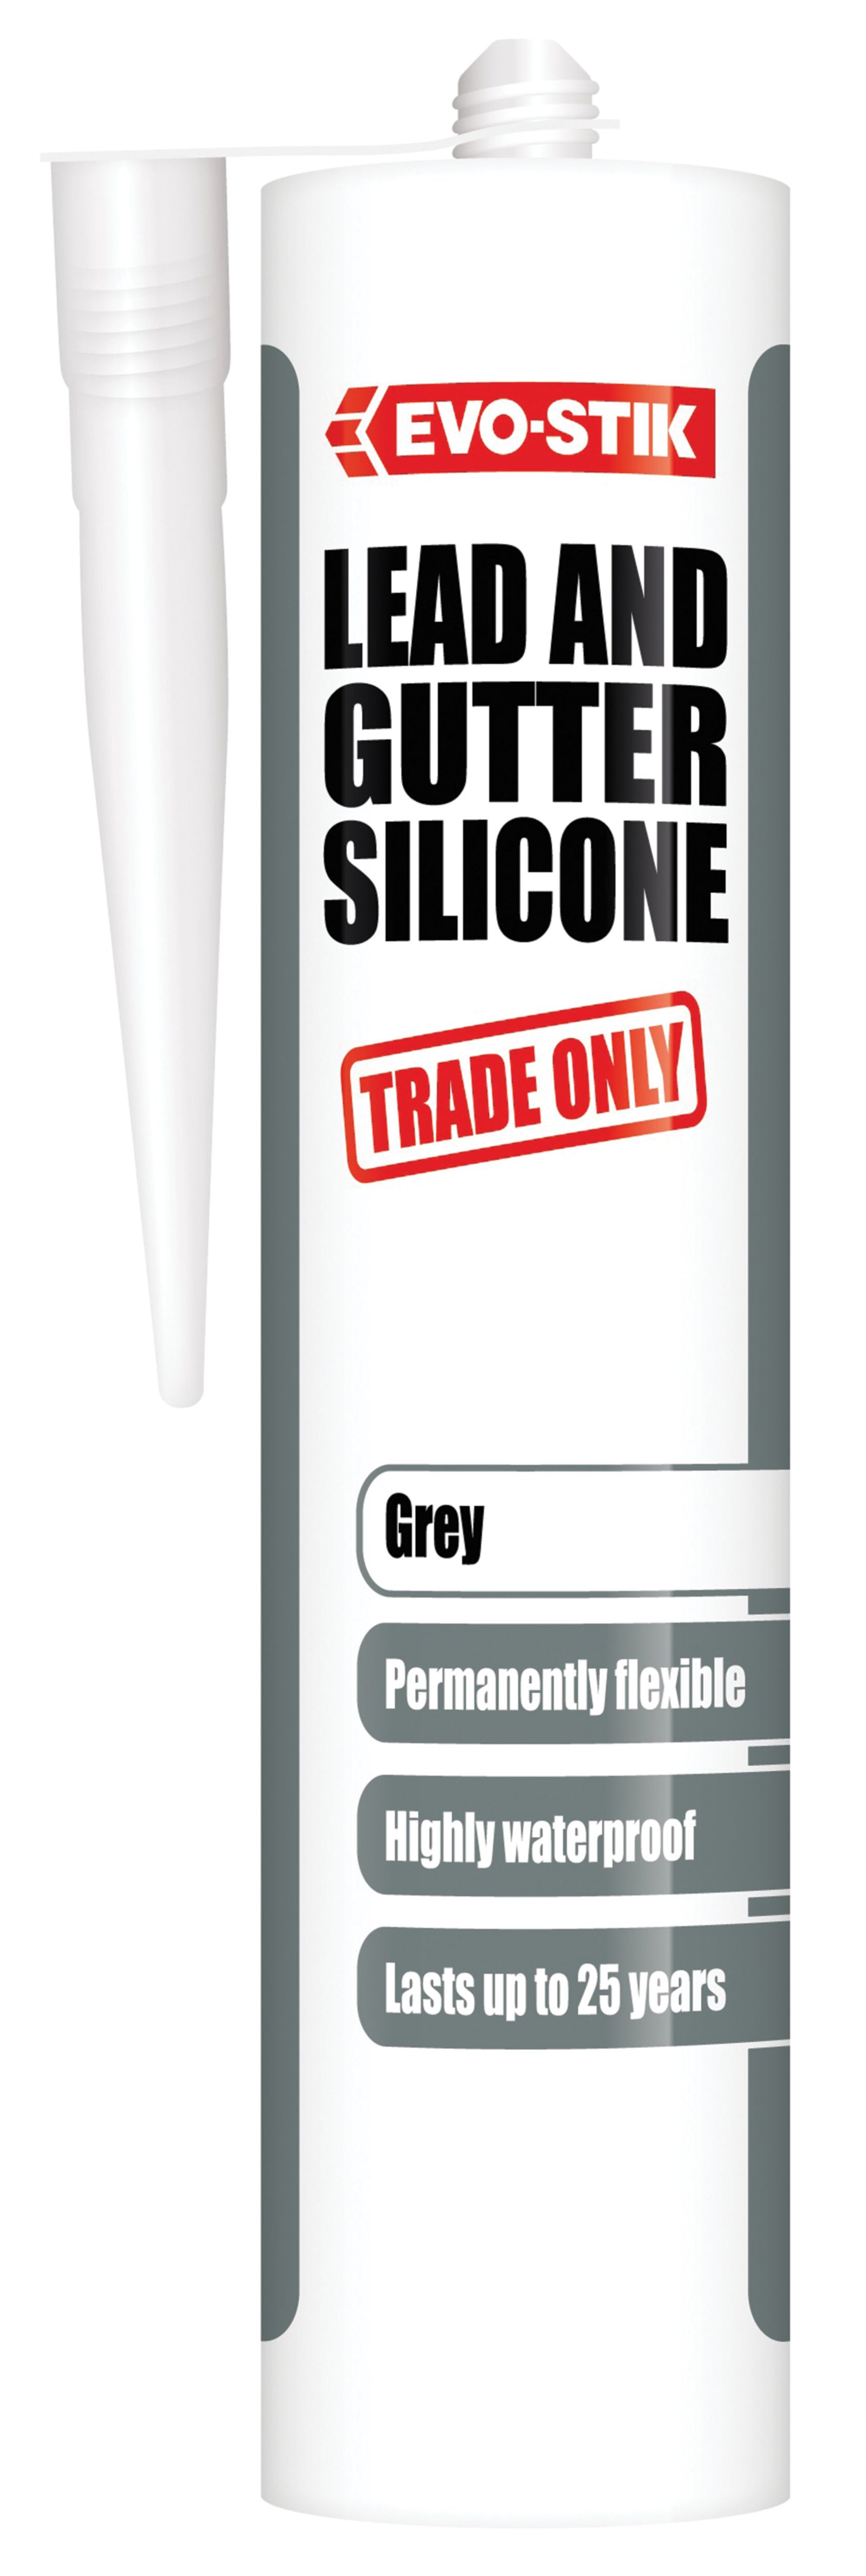 Evo-Stik Trade Only Lead & Gutter Grey Silicone - 280ml